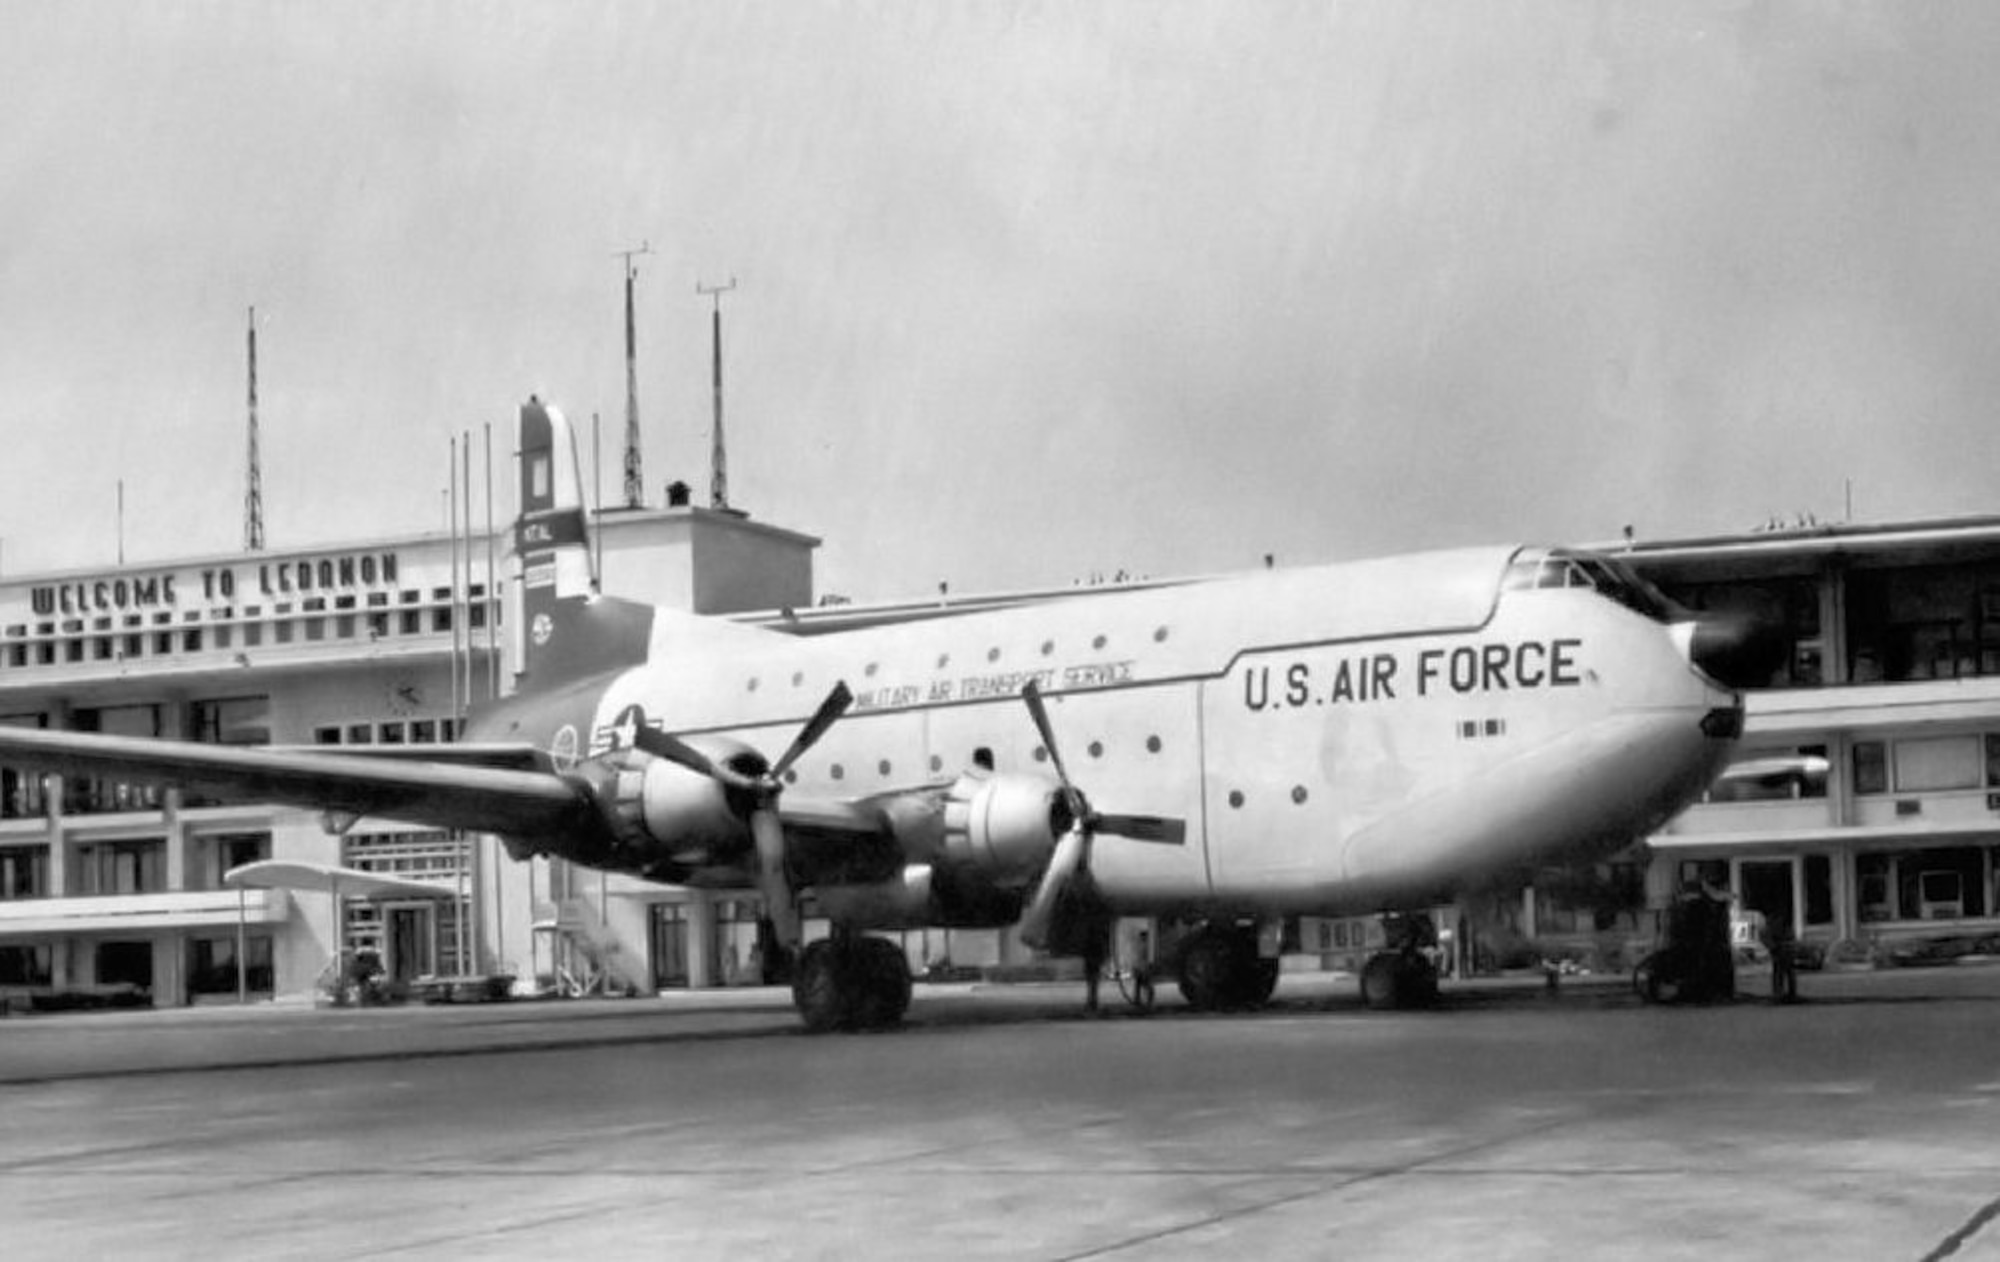 Incirlik Air Base Historical photo of a C-124 Globemaster II aircraft from the 1950s.